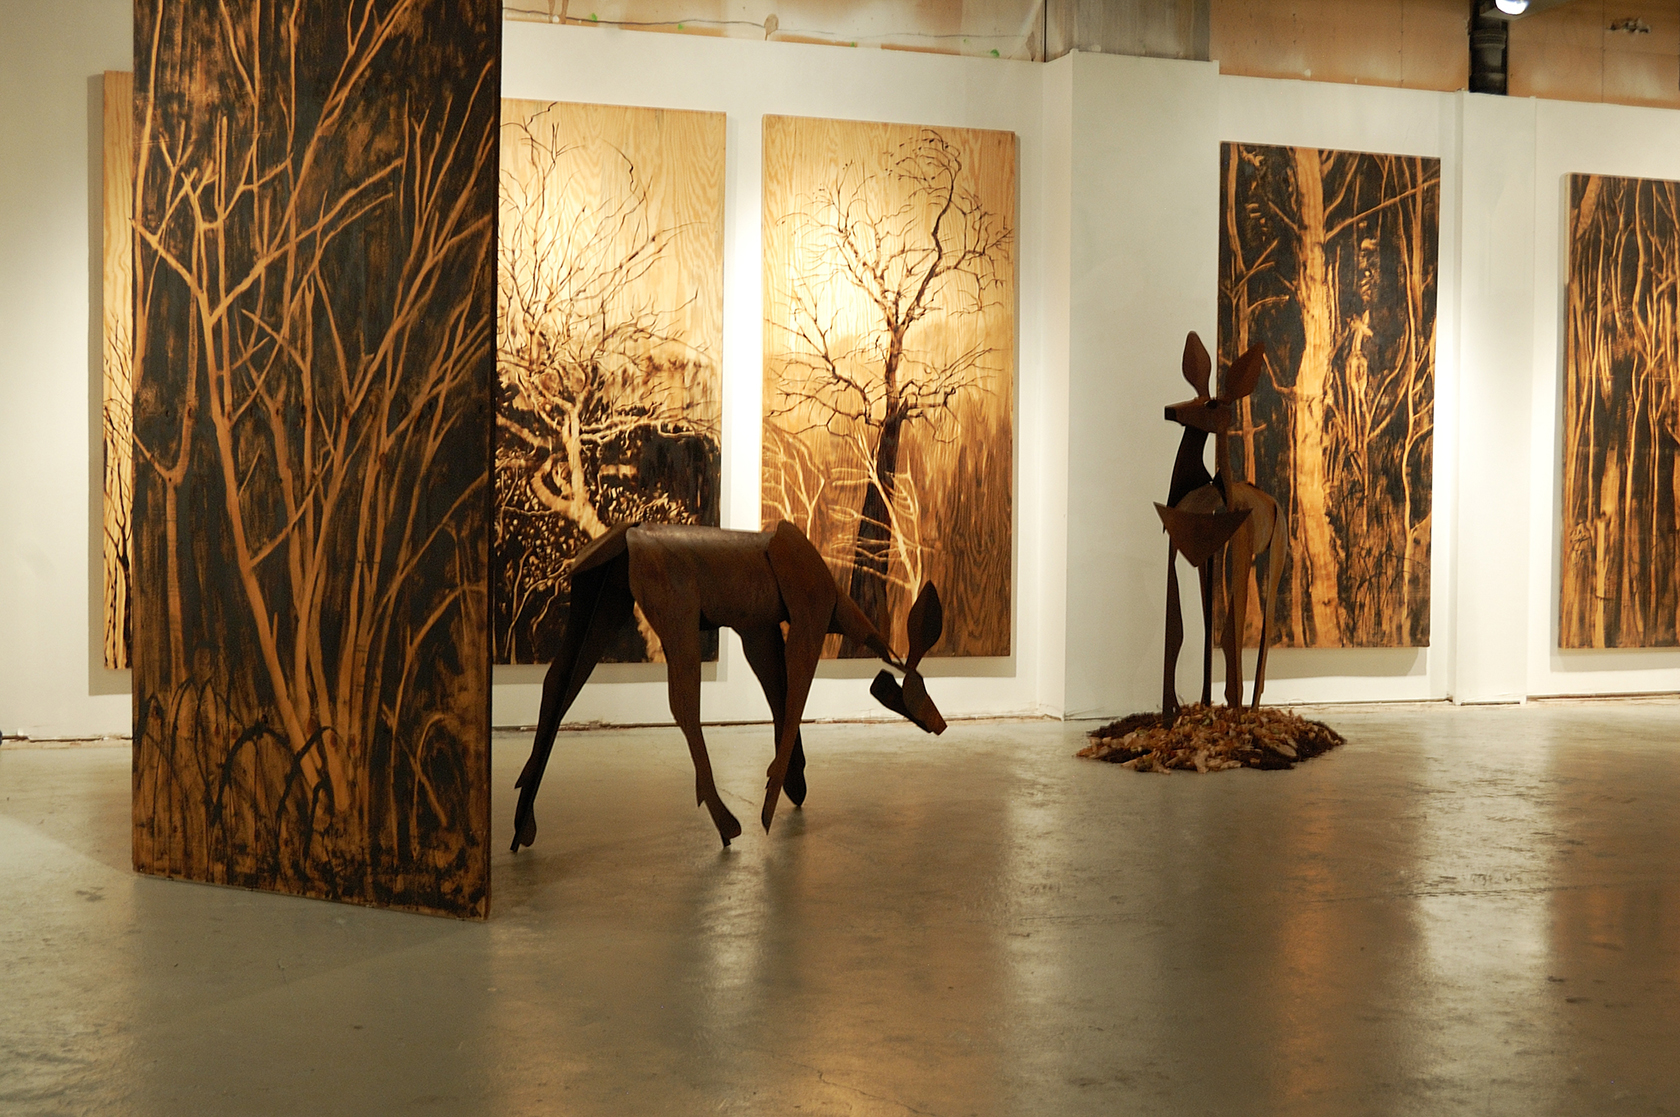  ​"Living Room" was a one-person show at Gallery 13, 811 LaSalle St., Minneapolis, MN. 
The animals are life-size, Corten steel, the panels, both freestanding 
and wall-hung, are each 4' x 8' plywood, painted in asphaltum.  